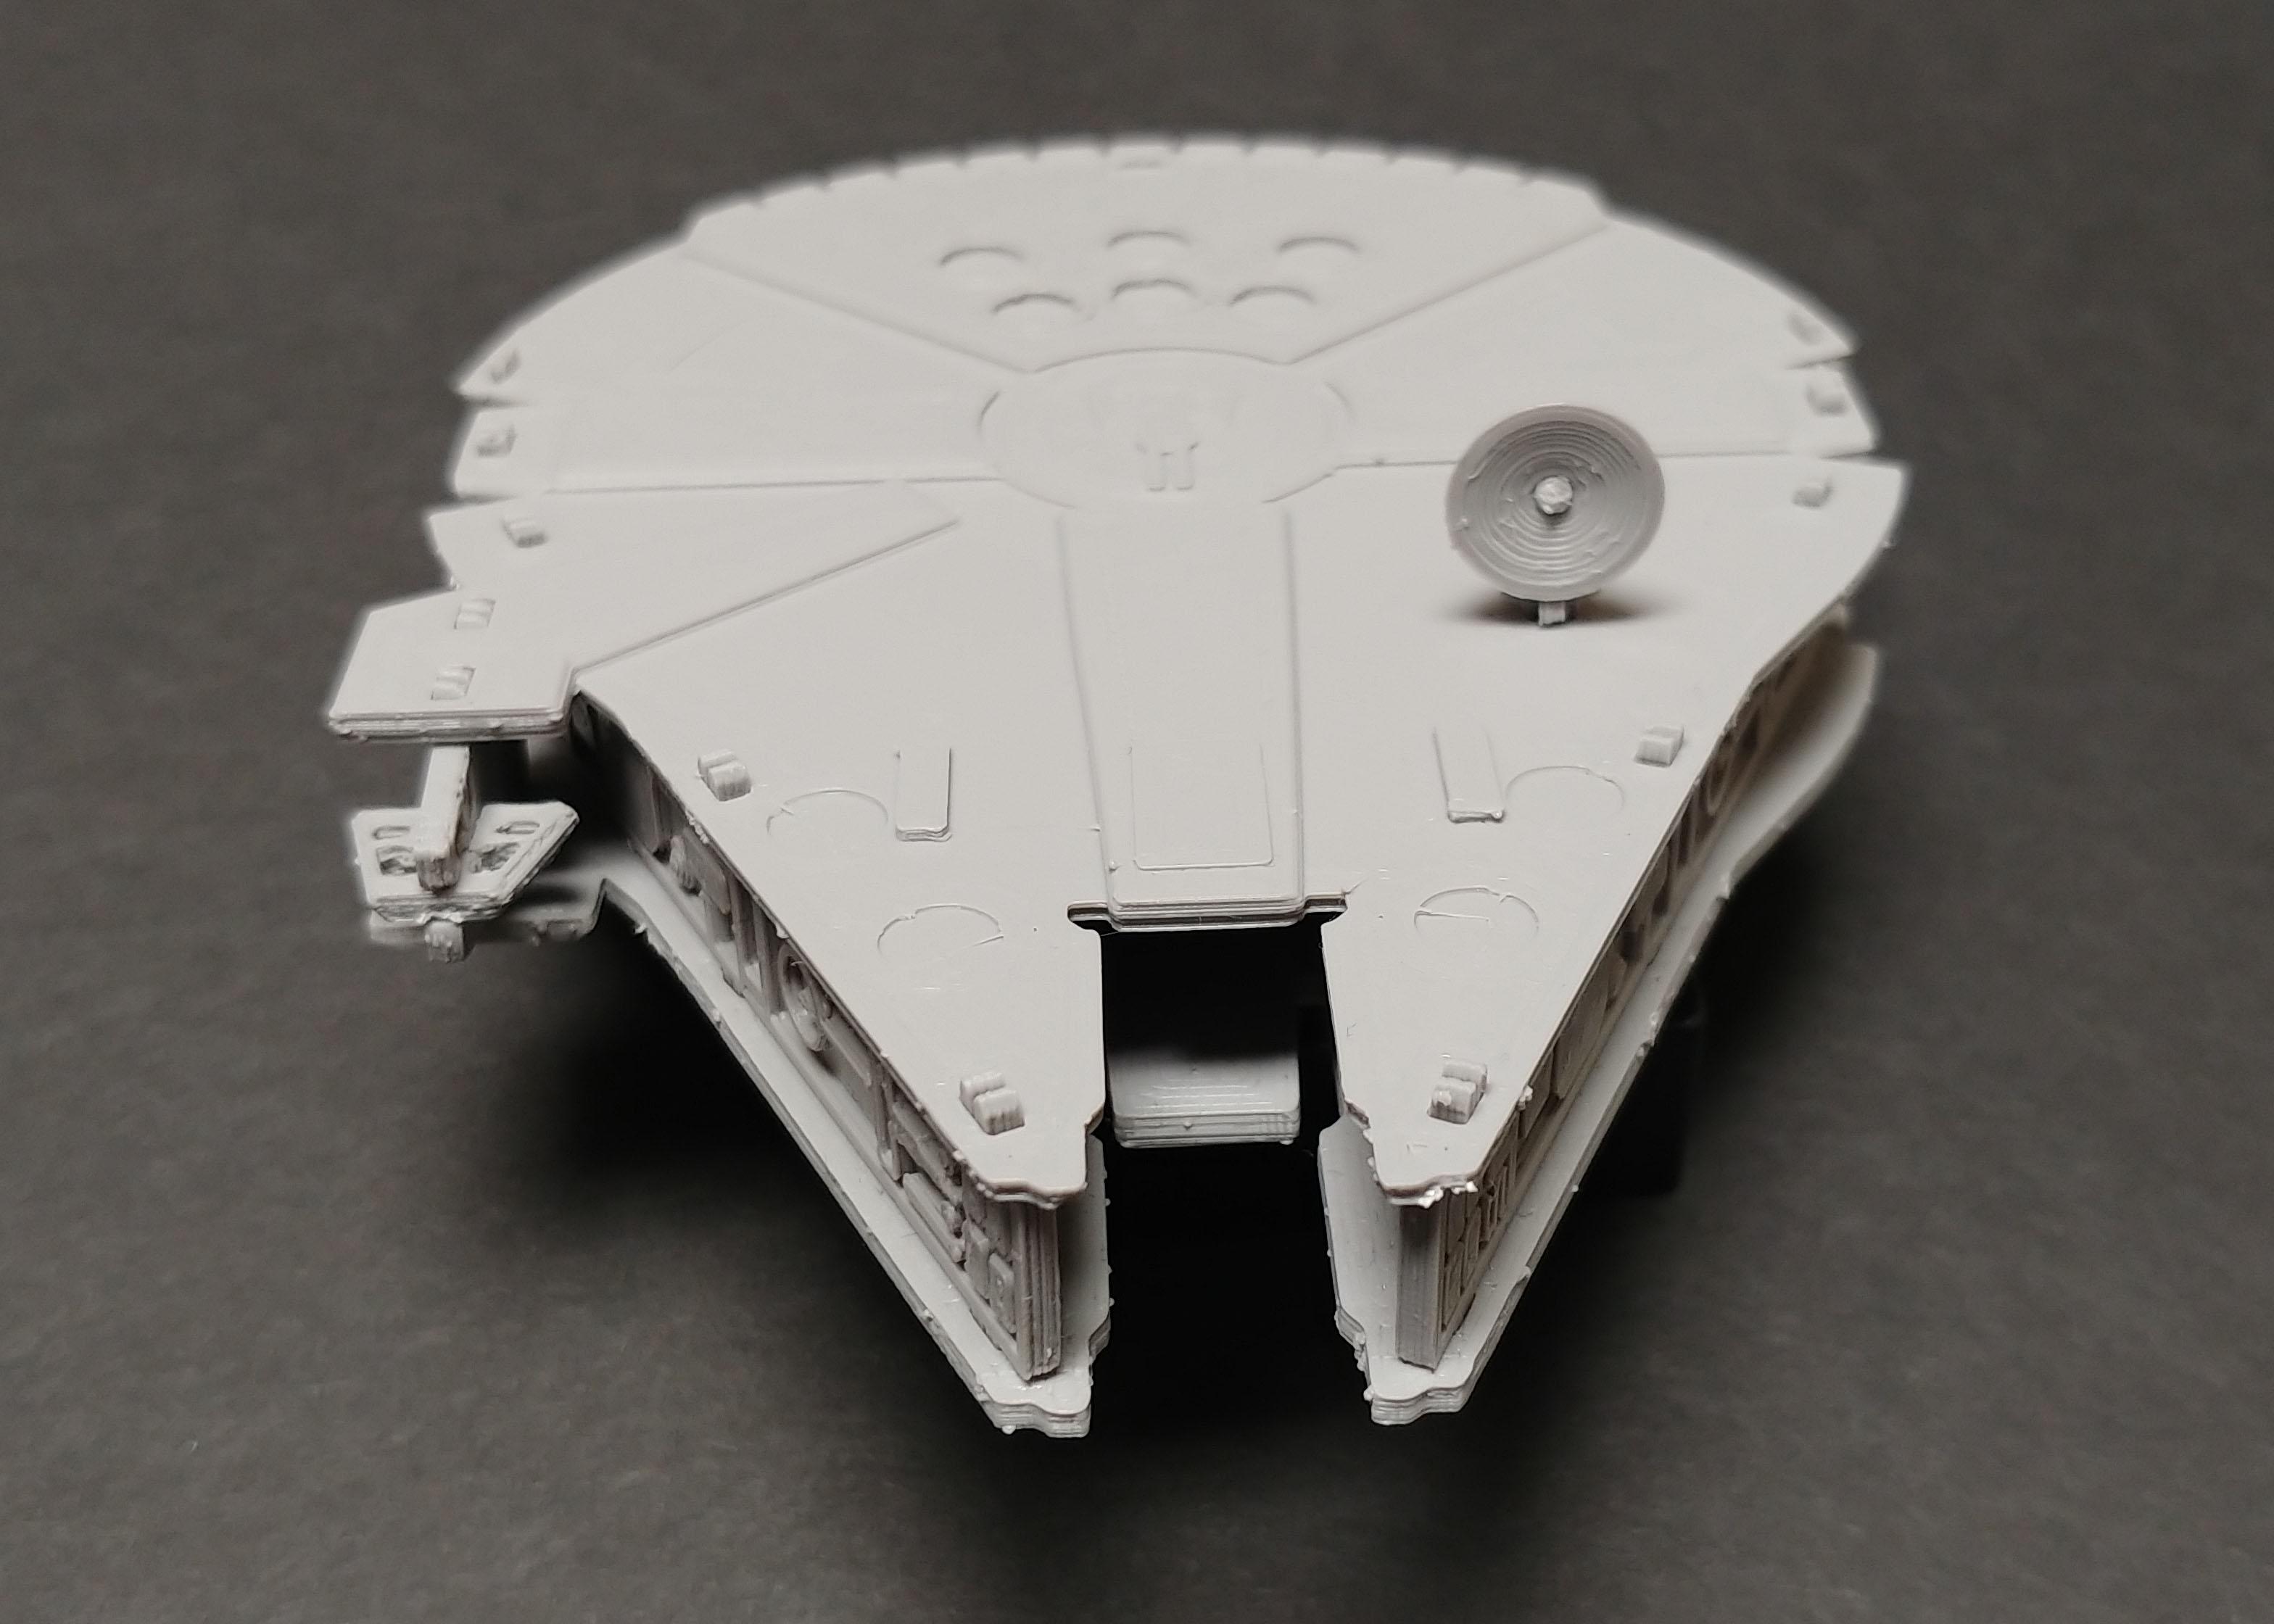 Millennium Falcon Kit Card by Fixumdude - Front View - 3d model